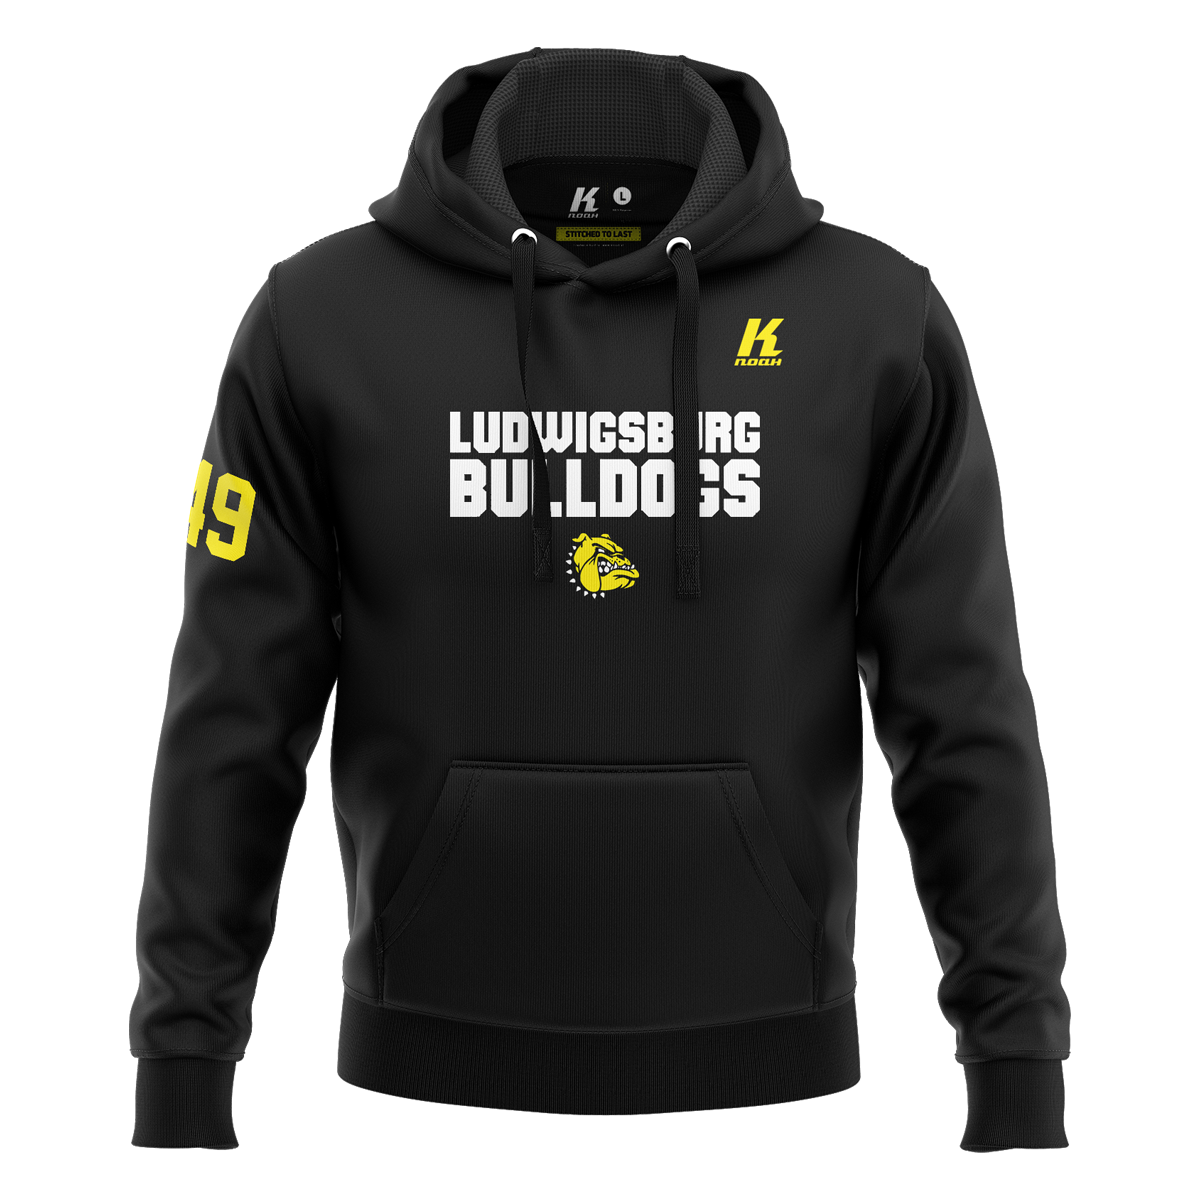 LB-Bulldogs Signature Series Hoodie black with Playernumber/Initials